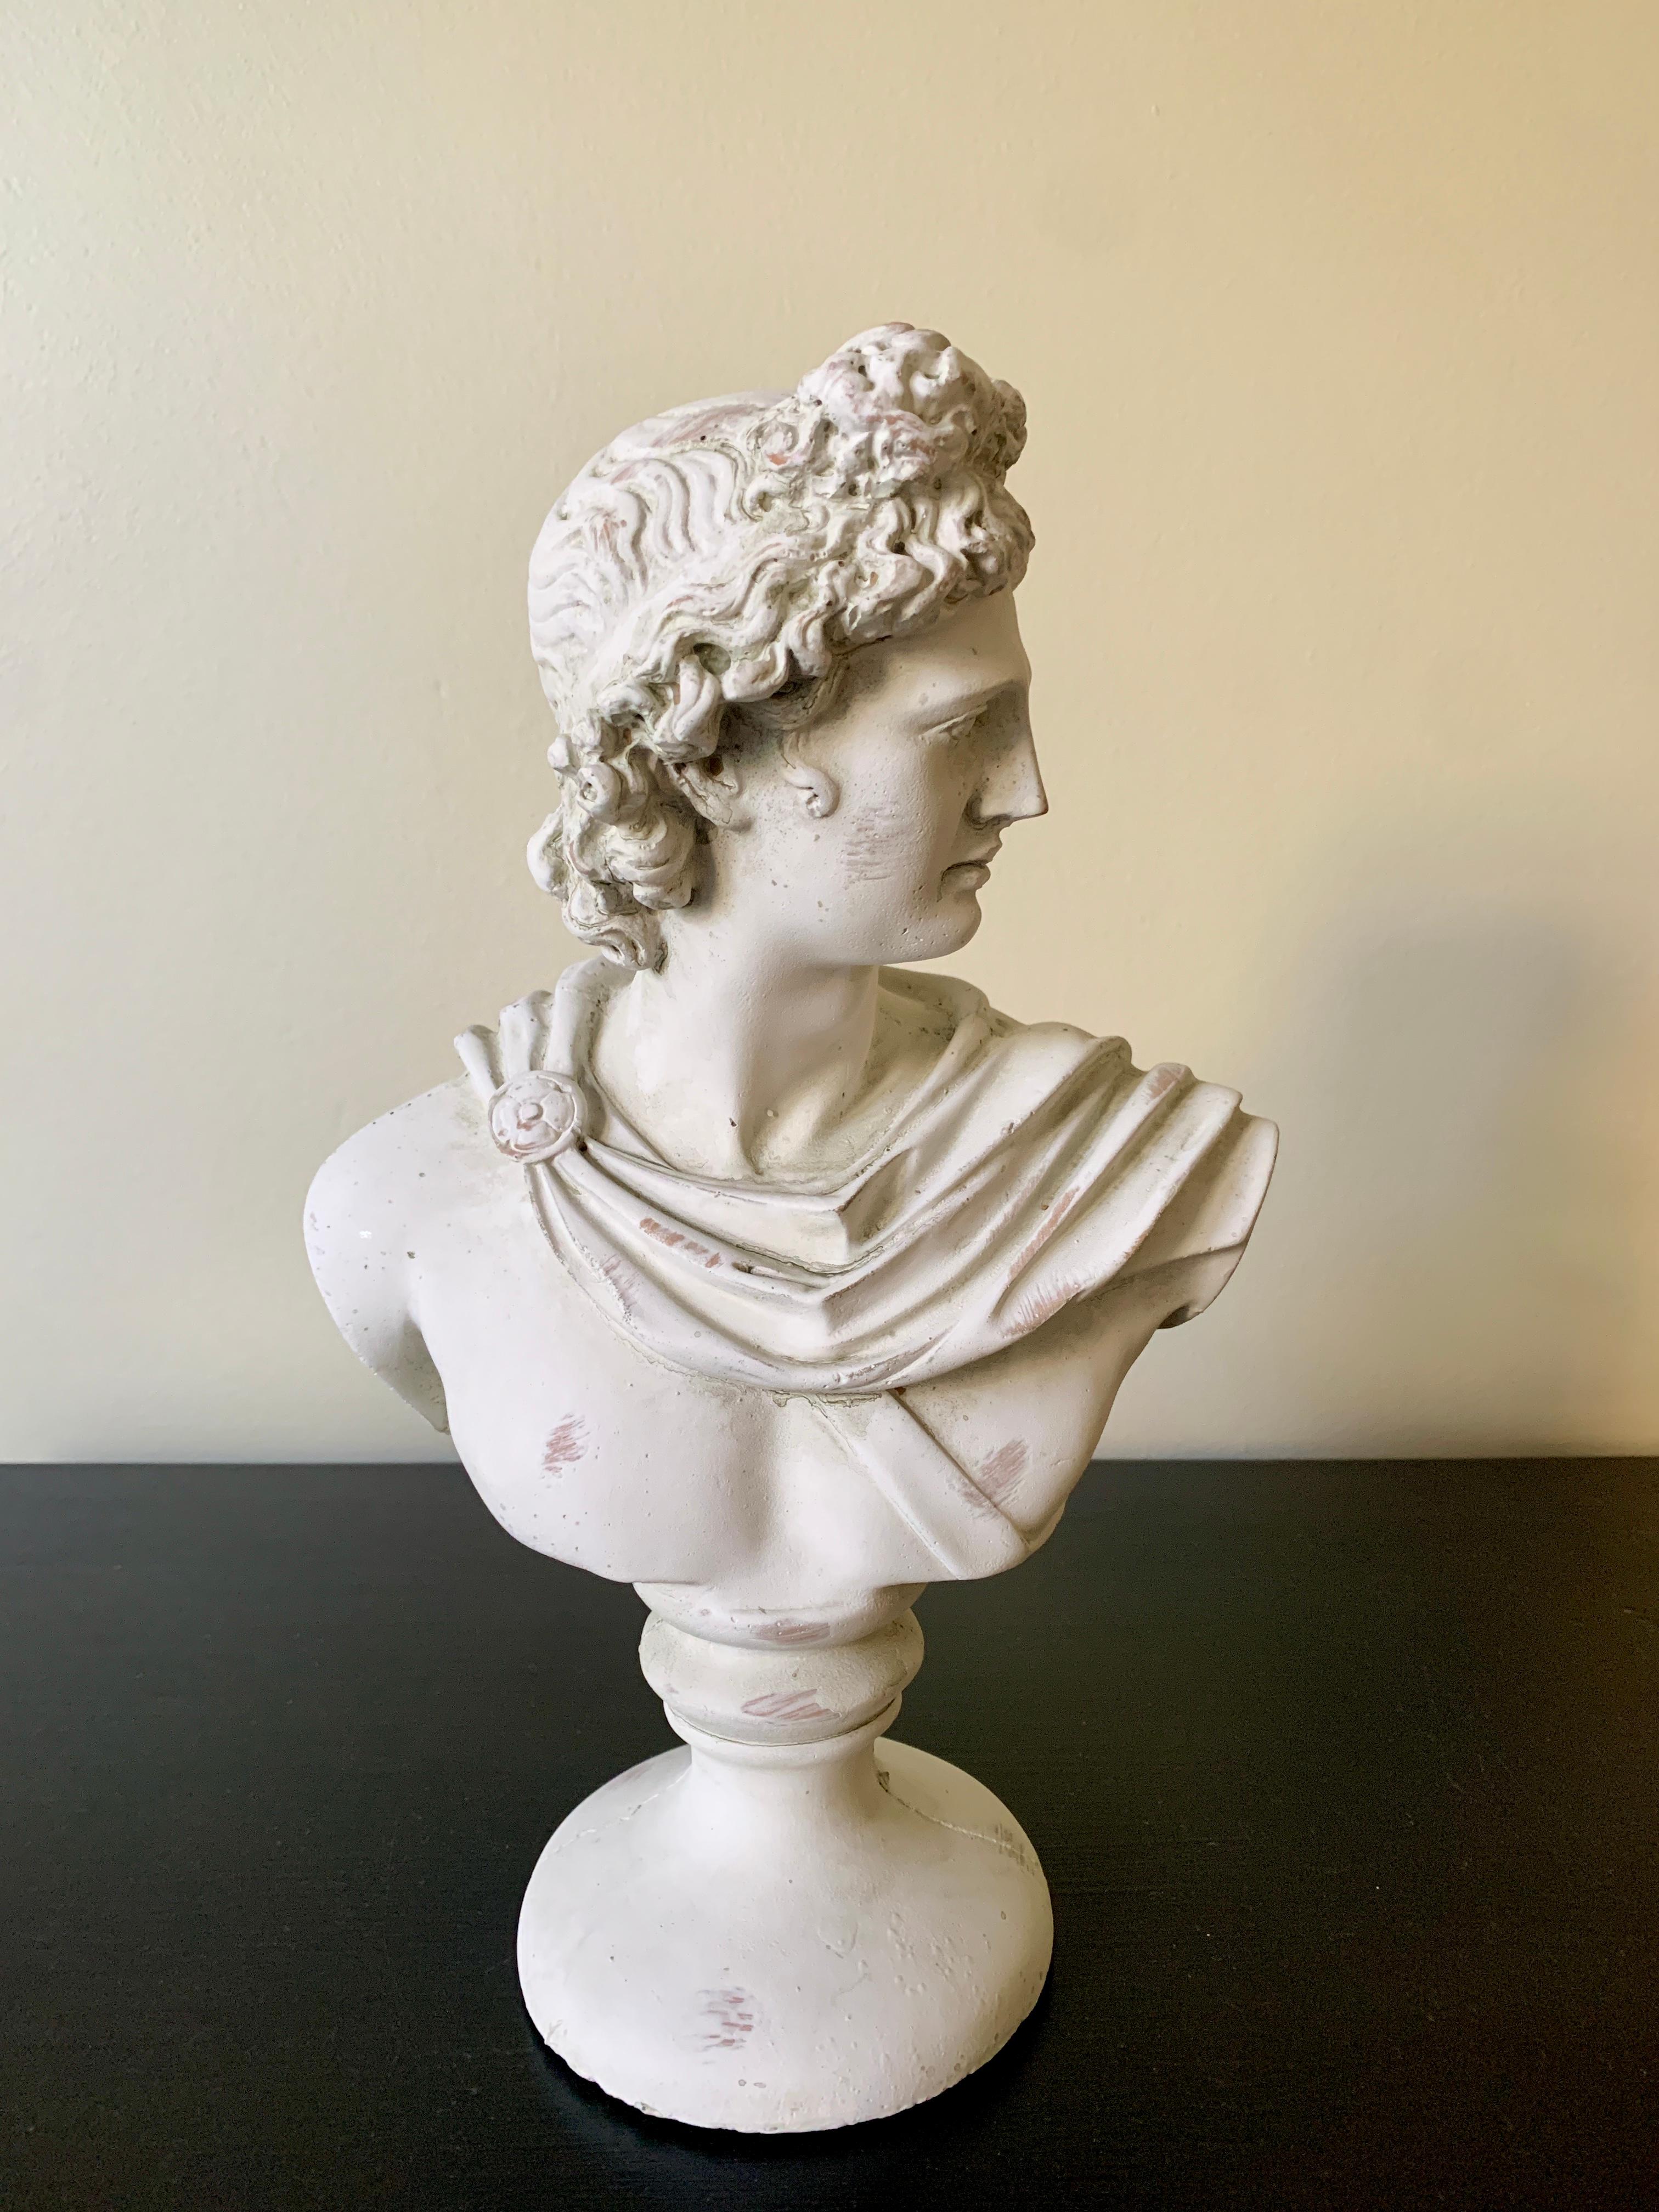 A gorgeous cast plaster Neoclassical Grand Tour style male head bust of the mythological god Apollo Belvedere sculpture

USA, 21st Century

Measures: 8